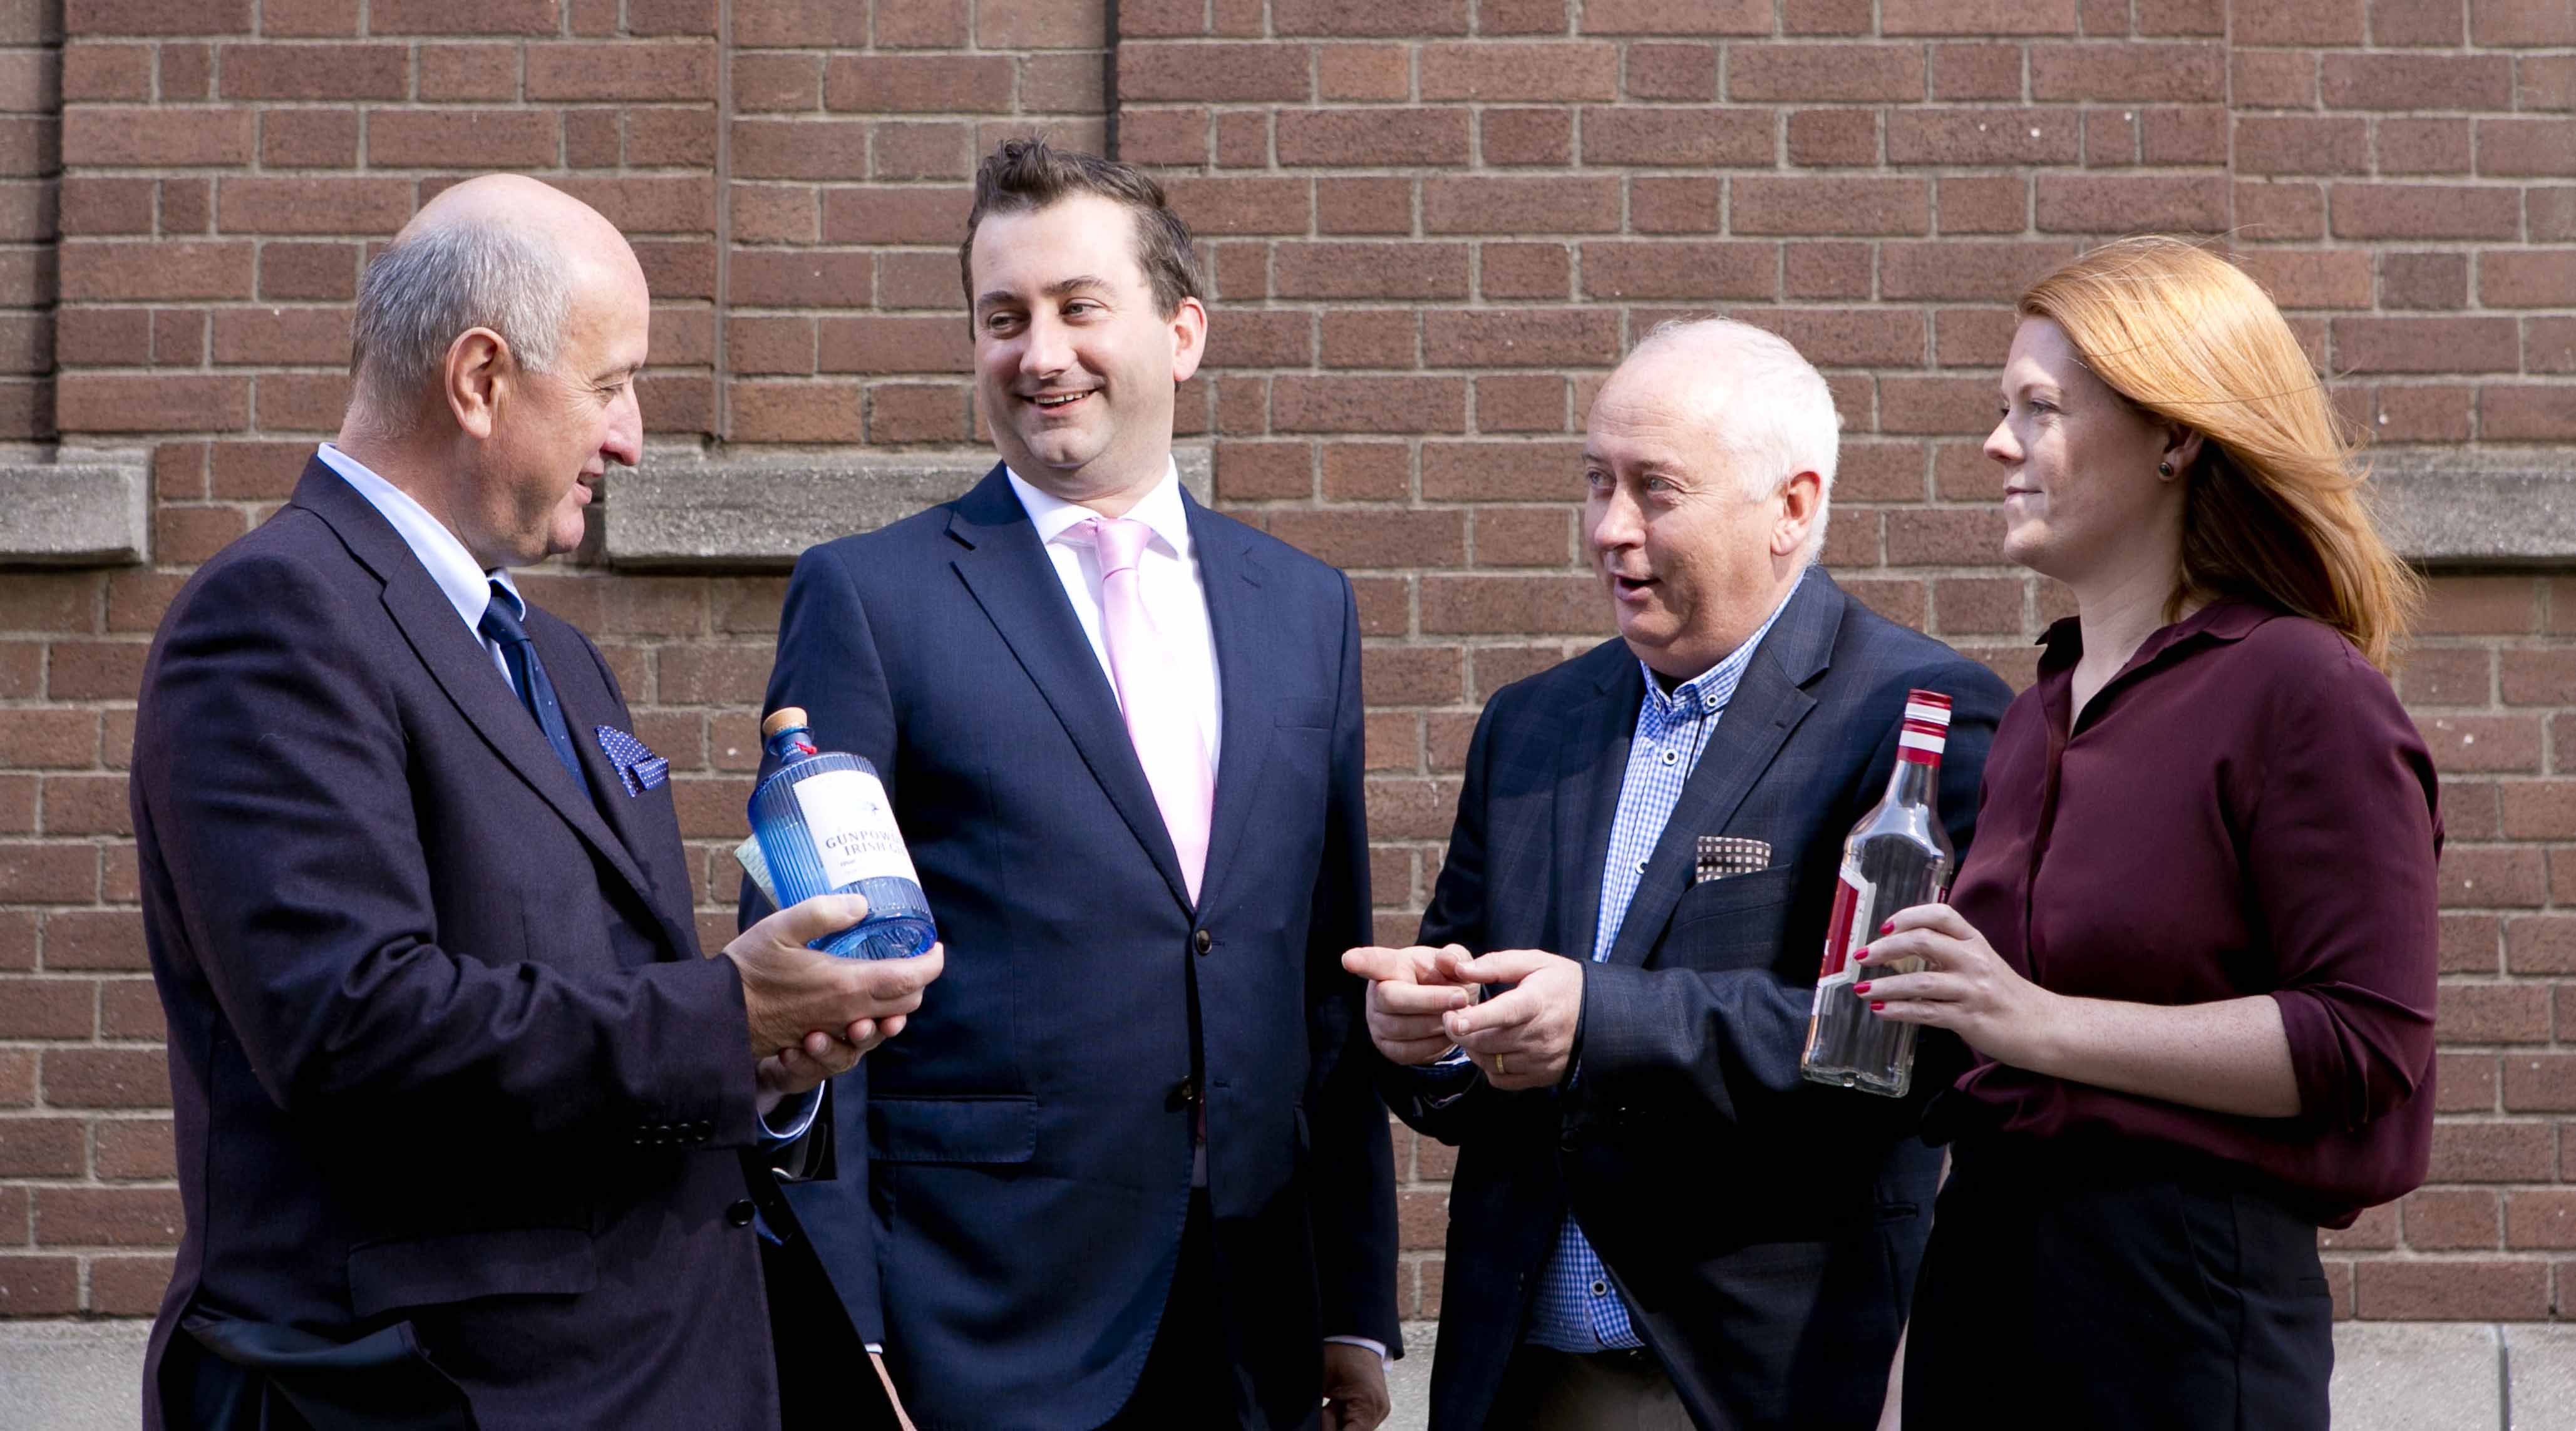 From left: Pat Rigney, Chair of the new gin producers group, with Irish Spirits Association Head William Lavelle, Irish Spirits Association Chair Johnny Harte and Public Affairs Director at IDL Pernod Ricard Claire MacCarrick.